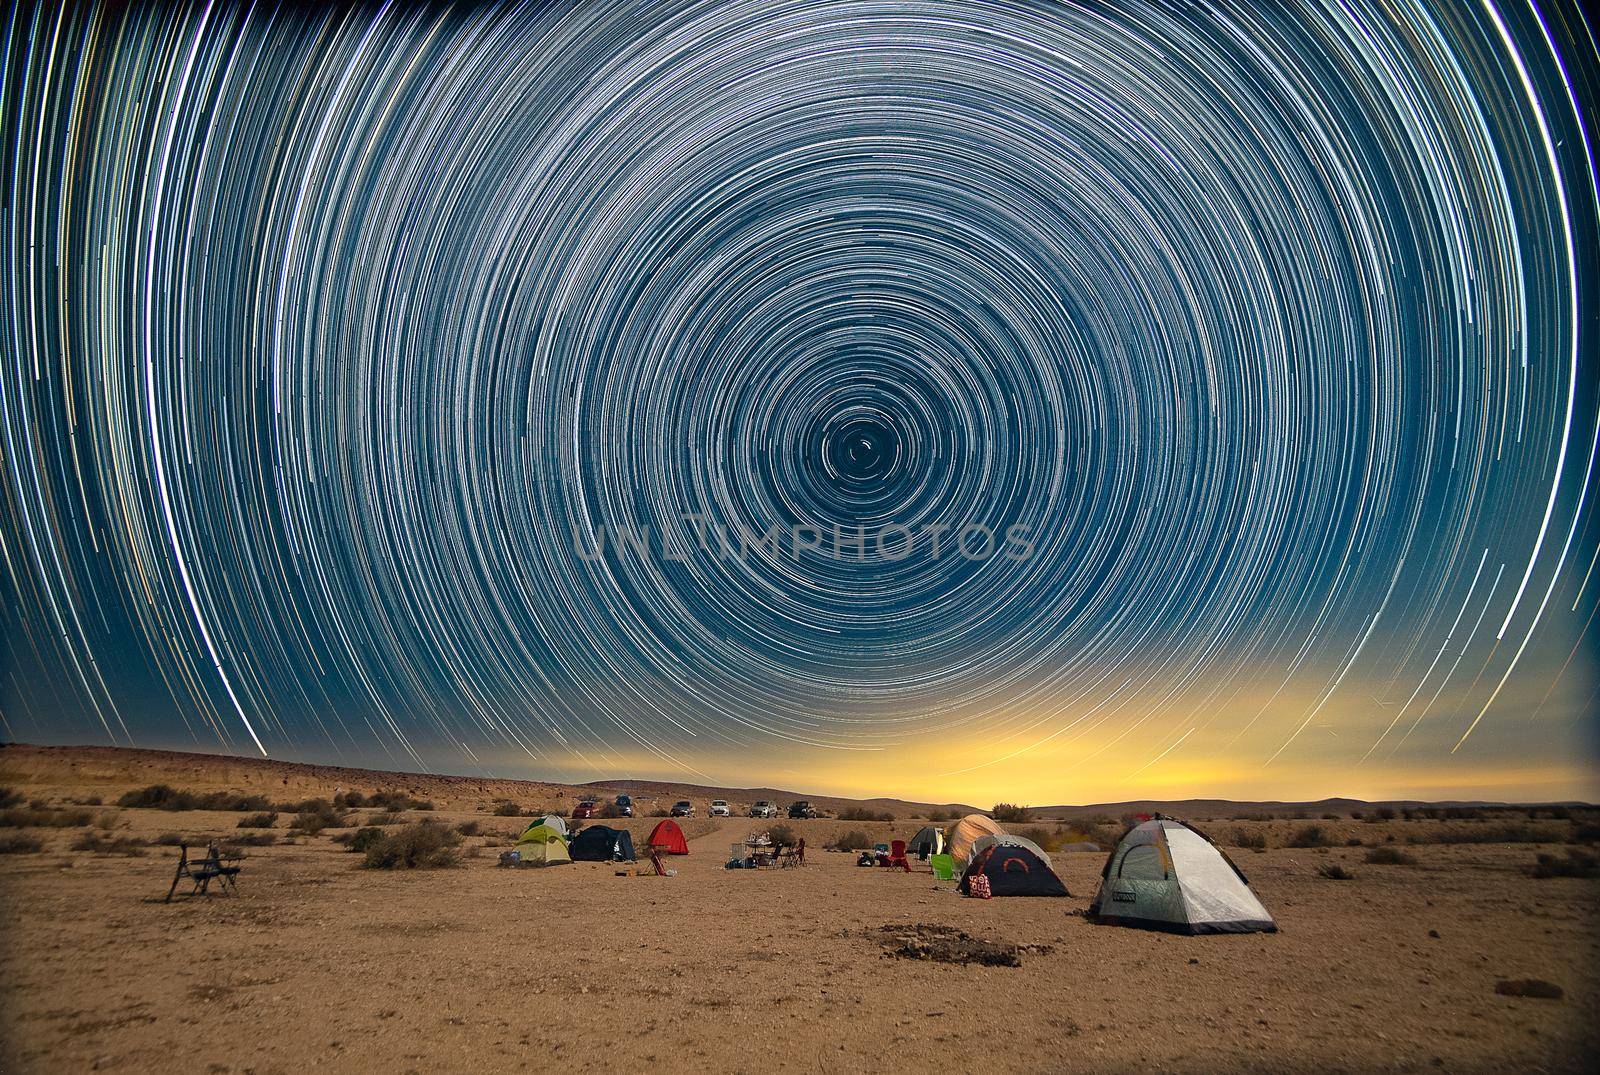 Star trails over noght desert camp by javax